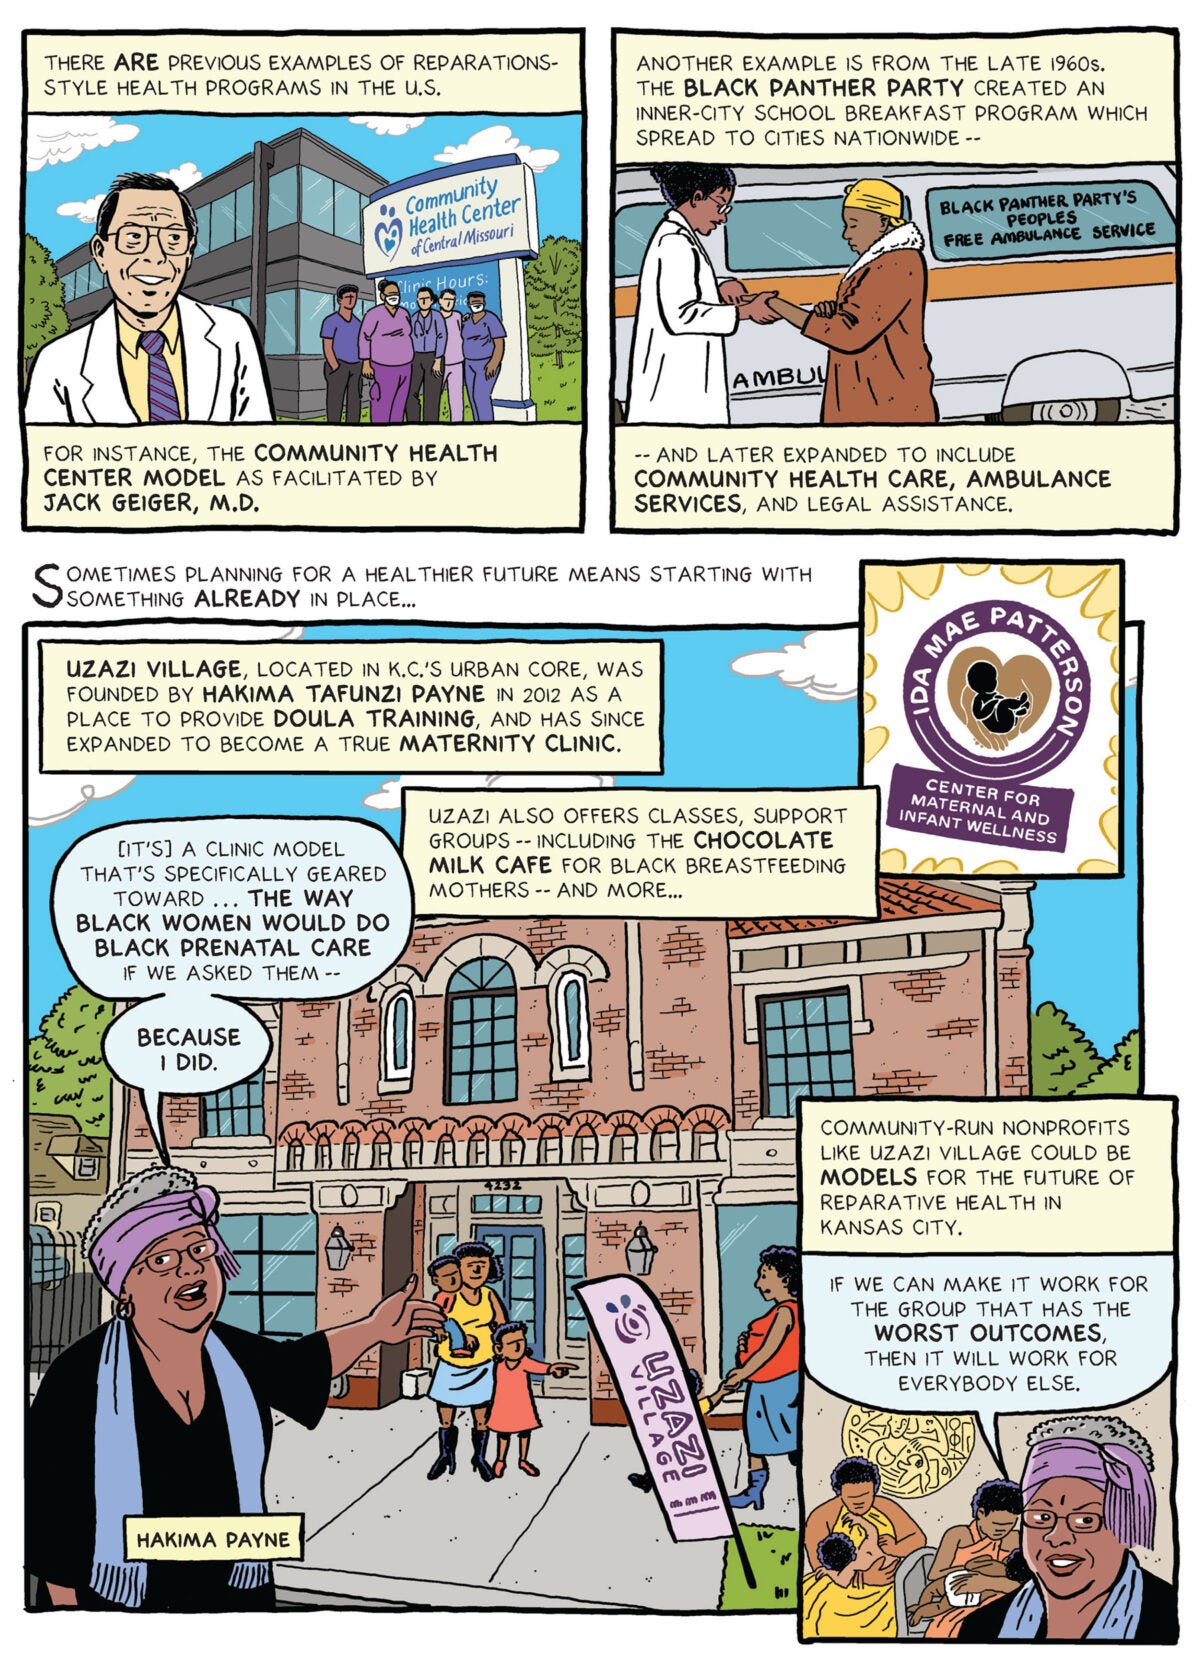 Image seven: Top left panel: Illustration of Dr. Jack Geiger, an older white man wearing glasses and a white lab coat over a shirt and tie, in front of a community health center with five healthcare workers of varying ethnicities in hospital scrubs. Text box reads: “There are previous examples of reparations-style health programs in the U.S. For instance, the community health center model as facilitated by Jack Geiger, M.D.”… Top right panel: Illustration of an ambulance labeled “Black Panther Party’s Peoples Free Ambulance Service.” A Black woman doctor in glasses and a white lab coat stands in front of the vehicle, examining the arm of a Black woman wearing a yellow head covering and a brown overcoat. Text box reads: “Another example is from the late 1960s. The Black Panther Party created an inner-city school breakfast program which later spread to cities nationwide and later expanded to include community health care, ambulance services, and legal assistance.”… Bottom panel: Text box reads: “Sometimes imagining a healthier future means starting with something already in place...” Illustration of the exterior of Uzazi Village, a brick, tile-roofed three-story building with large arched windows in Kansas City. Exiting the building is a Black woman with two children, while another Black woman and a child walk toward it. In the foreground, Hakima Payne, a Black woman wearing glasses, a gray mufti with a purple sash, a black dress and a blue scarf, gestures toward the building with her left hand, saying “It’s a clinic model that’s specifically geared toward the way Black women would do black prenatal care if we asked them —because I did.” Text box reads: “Uzazi Village, located in K.C.’s urban core, was founded by Hakima Tafunzi Payne in 2012 as a place to provide doula training, and has since expanded to become a true maternity clinic. Uzazi also offers classes, support groups – including the chocolate milk café for Black breastfeeding mothers—and more…” Illustration of a logo: Ida Mae Patterson Center for Maternal and Infant Wellness. … Bottom right panel: Inset illustration of Black women breastfeeding in the Chocolate Milk Cafe. Text box reads: “Community non-profits like Uzazi Village could be models for the future of reparative health in Kansas City.” Close-up illustration of Payne who says “If we can make it work for the group that has the worst outcomes, then it will work for everybody else.”